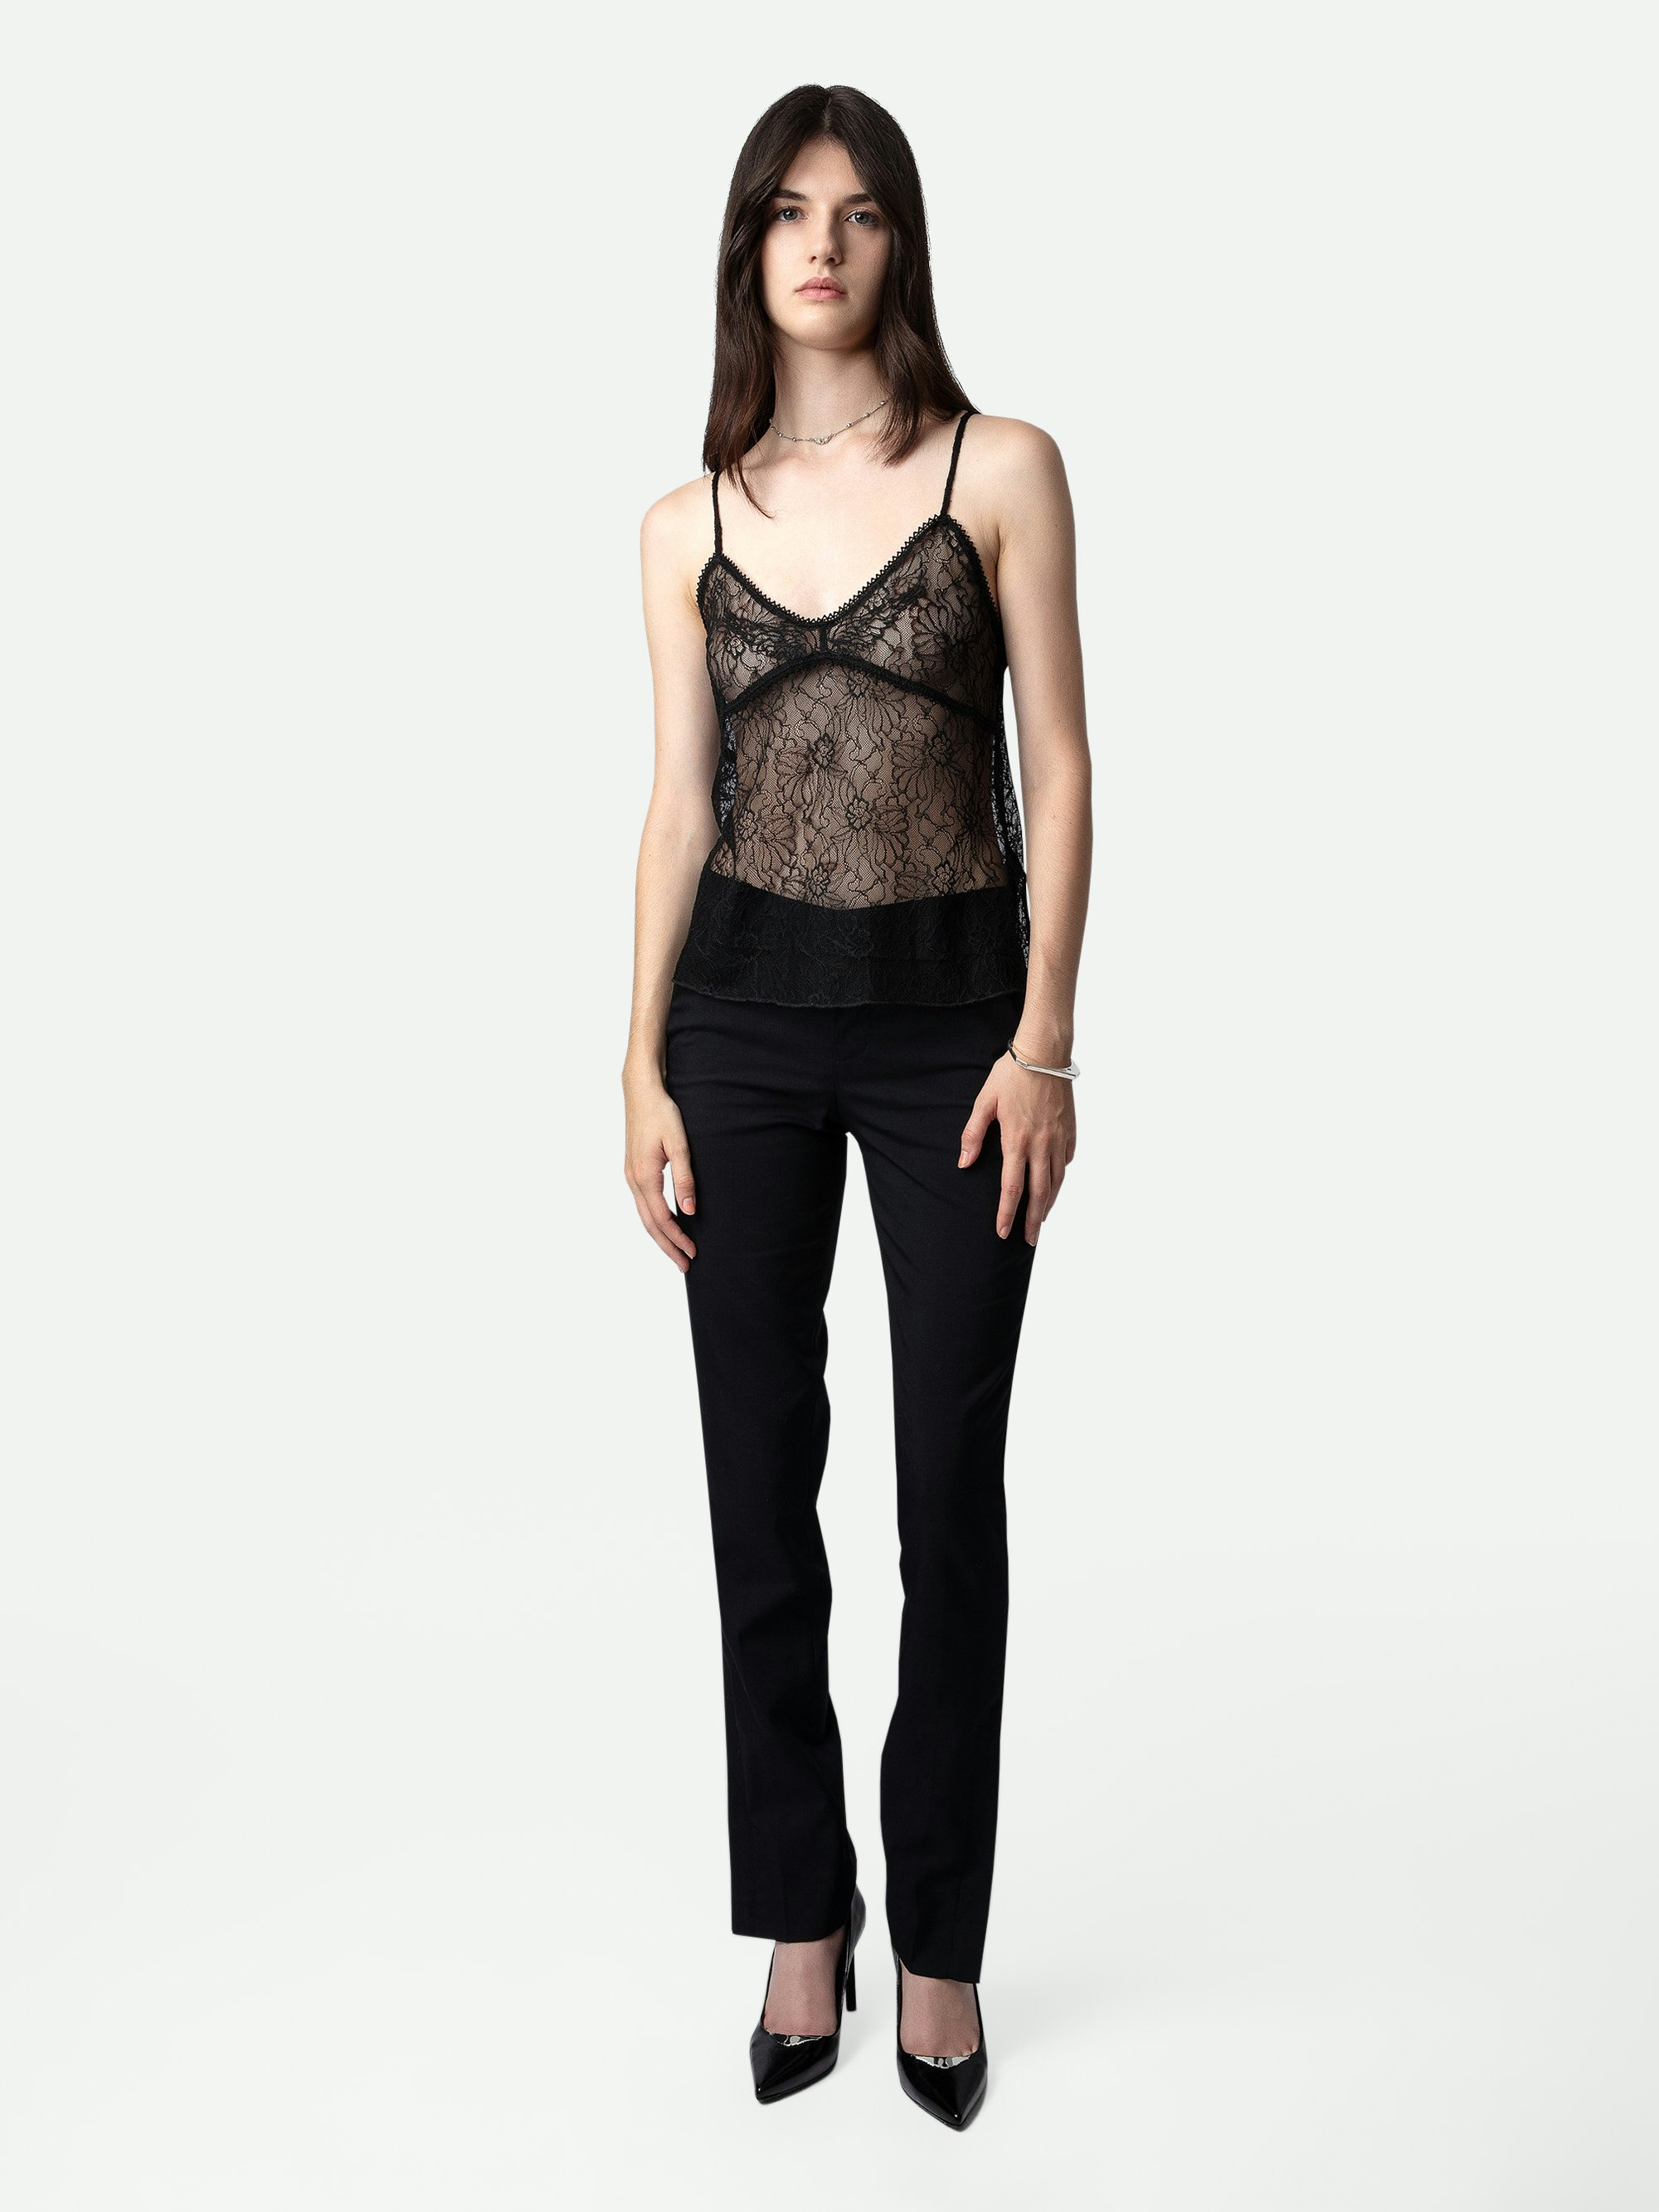 Lyzig Camisole - Black sheer lingerie-style camisole with thin adjustable straps embellished with floral embroidery.